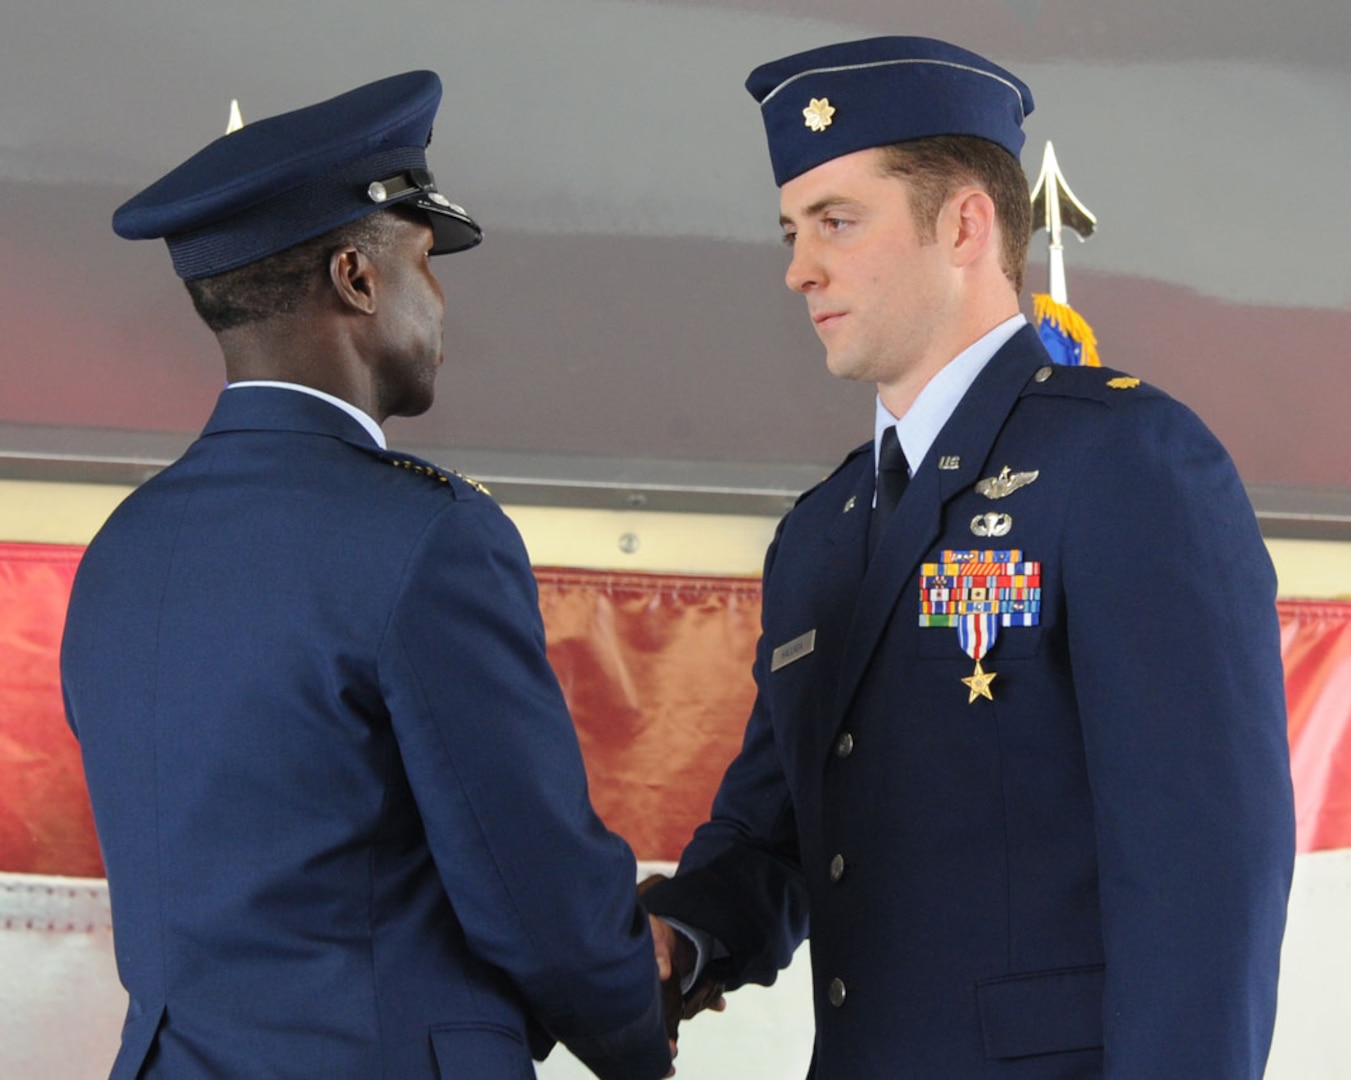 Maj. Joshua Hallada, combat search and rescue pilot, was presented the
Silver Star medal at the 19th Air Force's inactivation ceremony Thursday at
Joint Base San Antonio-Randolph.  Gen. Edward A. Rice Jr., Air Education
Training Command commander, presented the third highest military decoration
to Hallada for his participation in a recovery mission of two U.S. Army
pilots who were downed in the Allasay Valley, an enemy controlled area east
of Bagram Airfield, Afghanistan on April 23, 2011.  (U.S. Air Force photo by Rich McFadden)